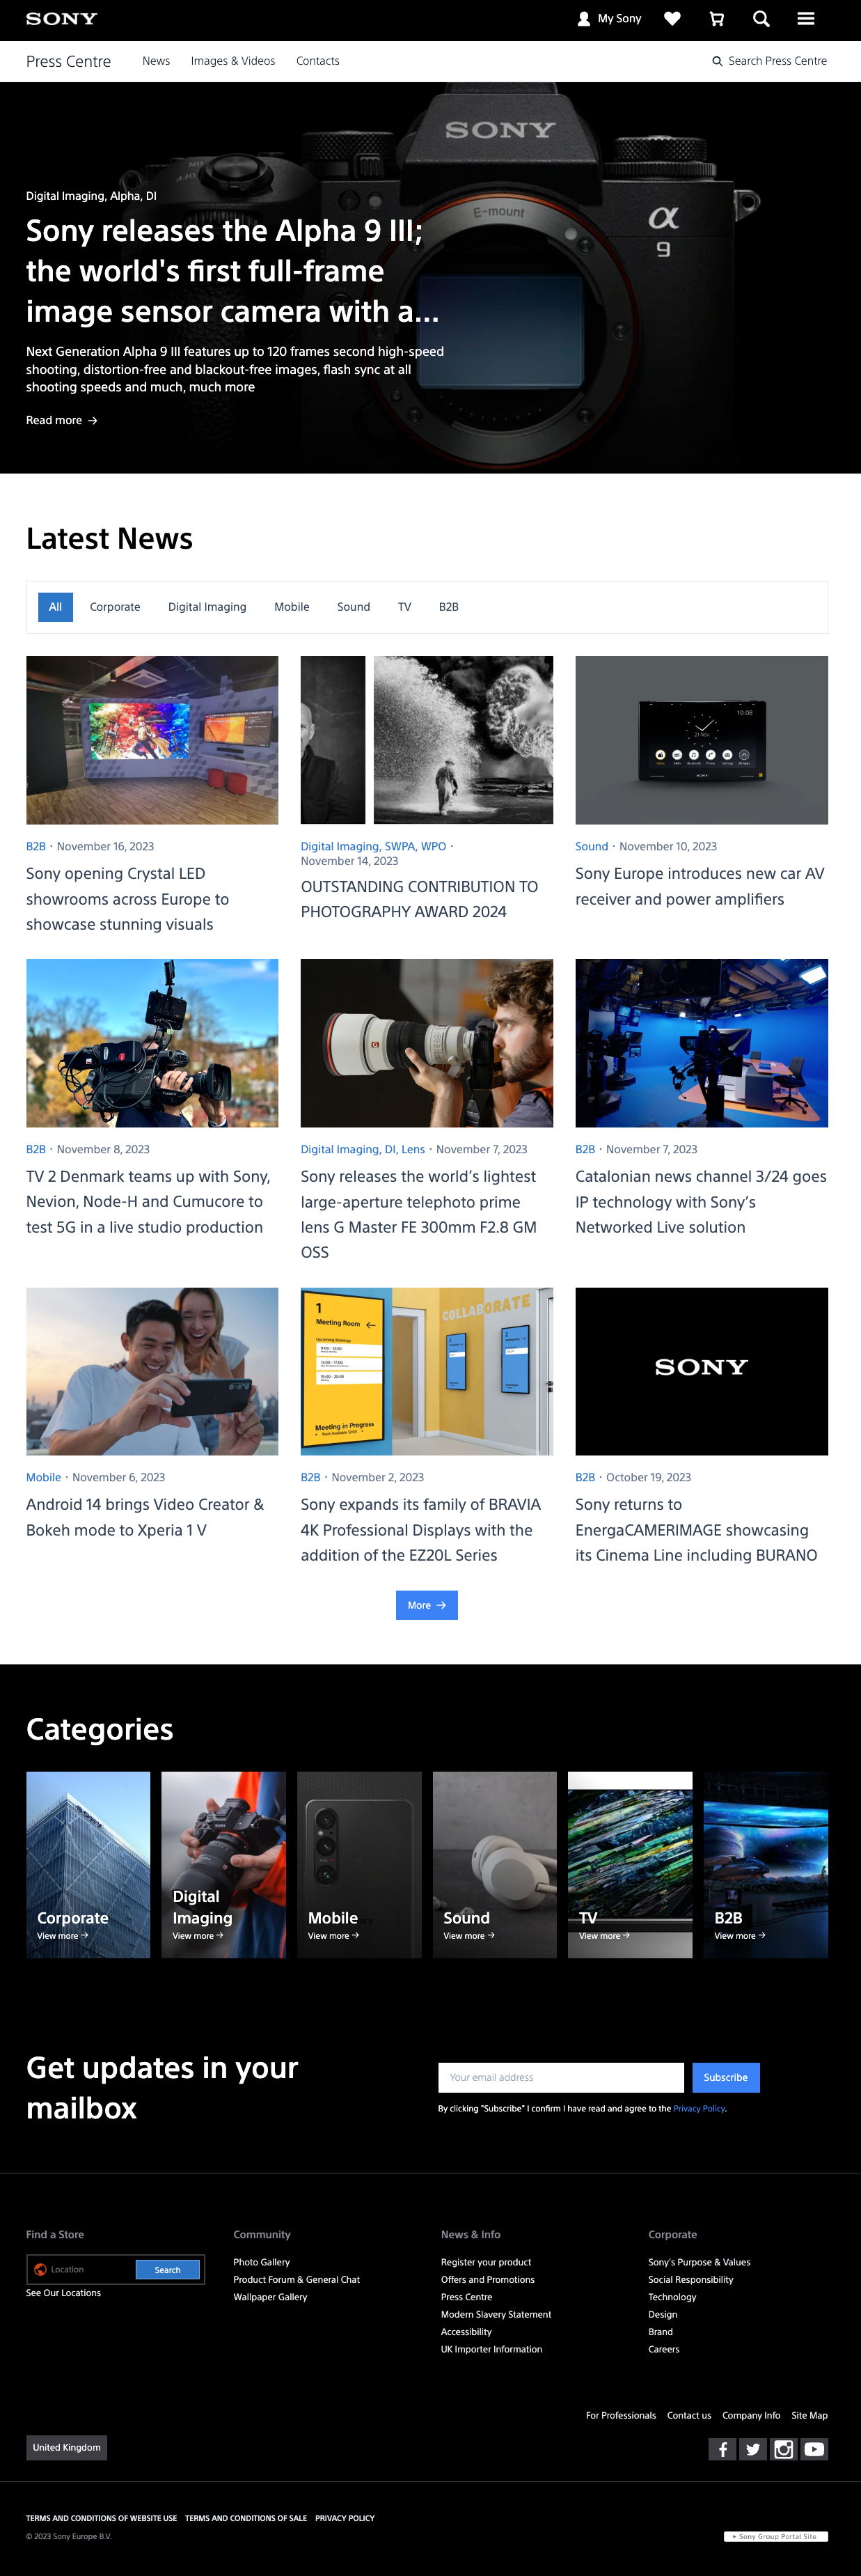 Sony equips journalists with the assets they need to tell their story